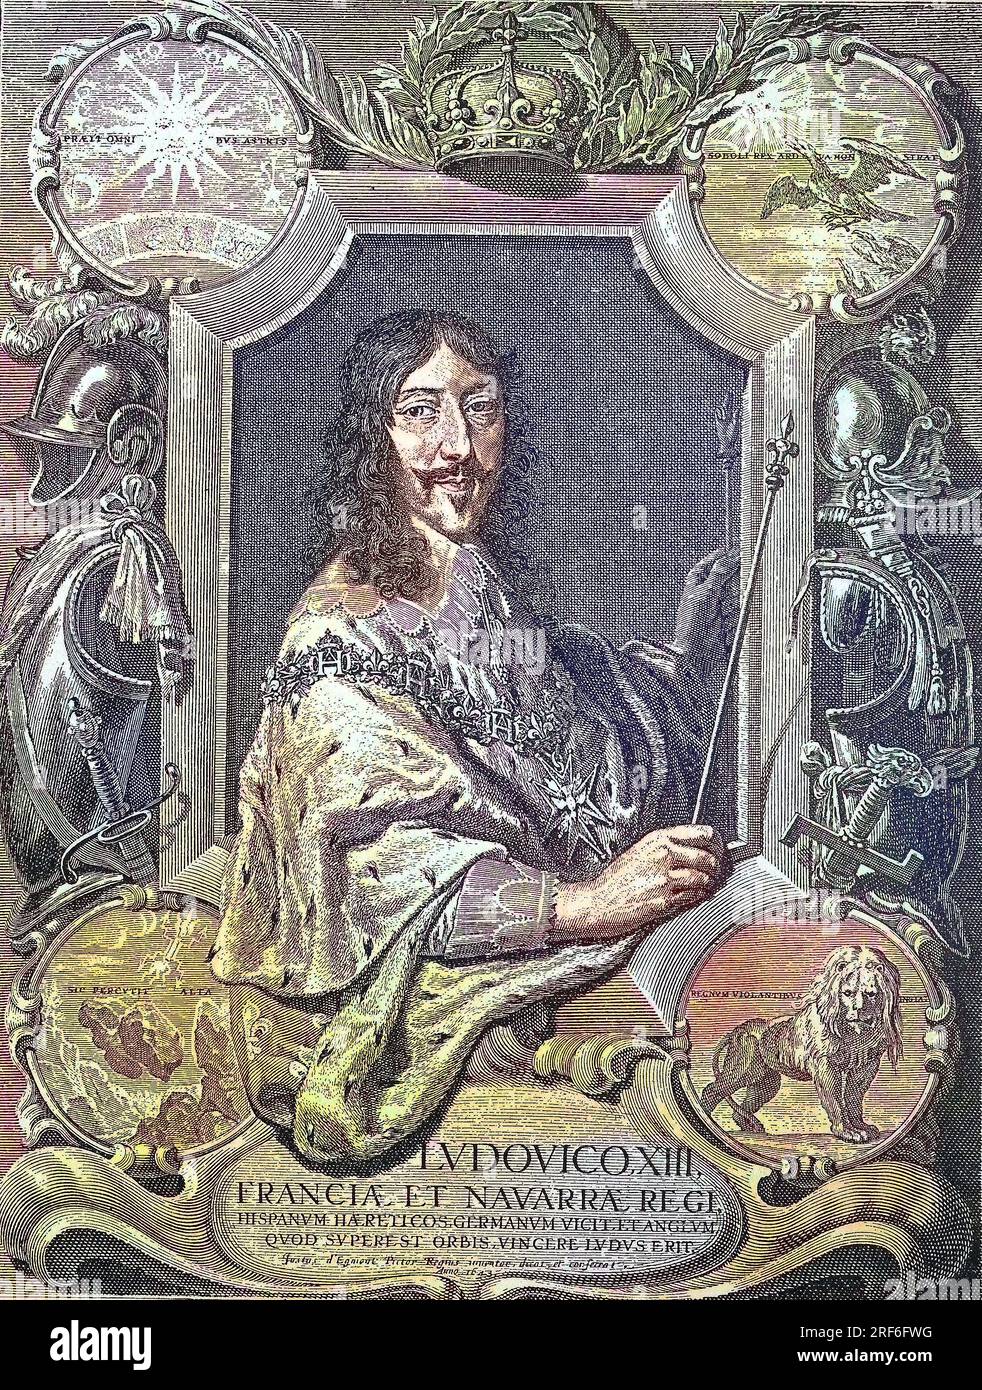 May 14, 1643: Death of Louis XIII, King of France and Navarre